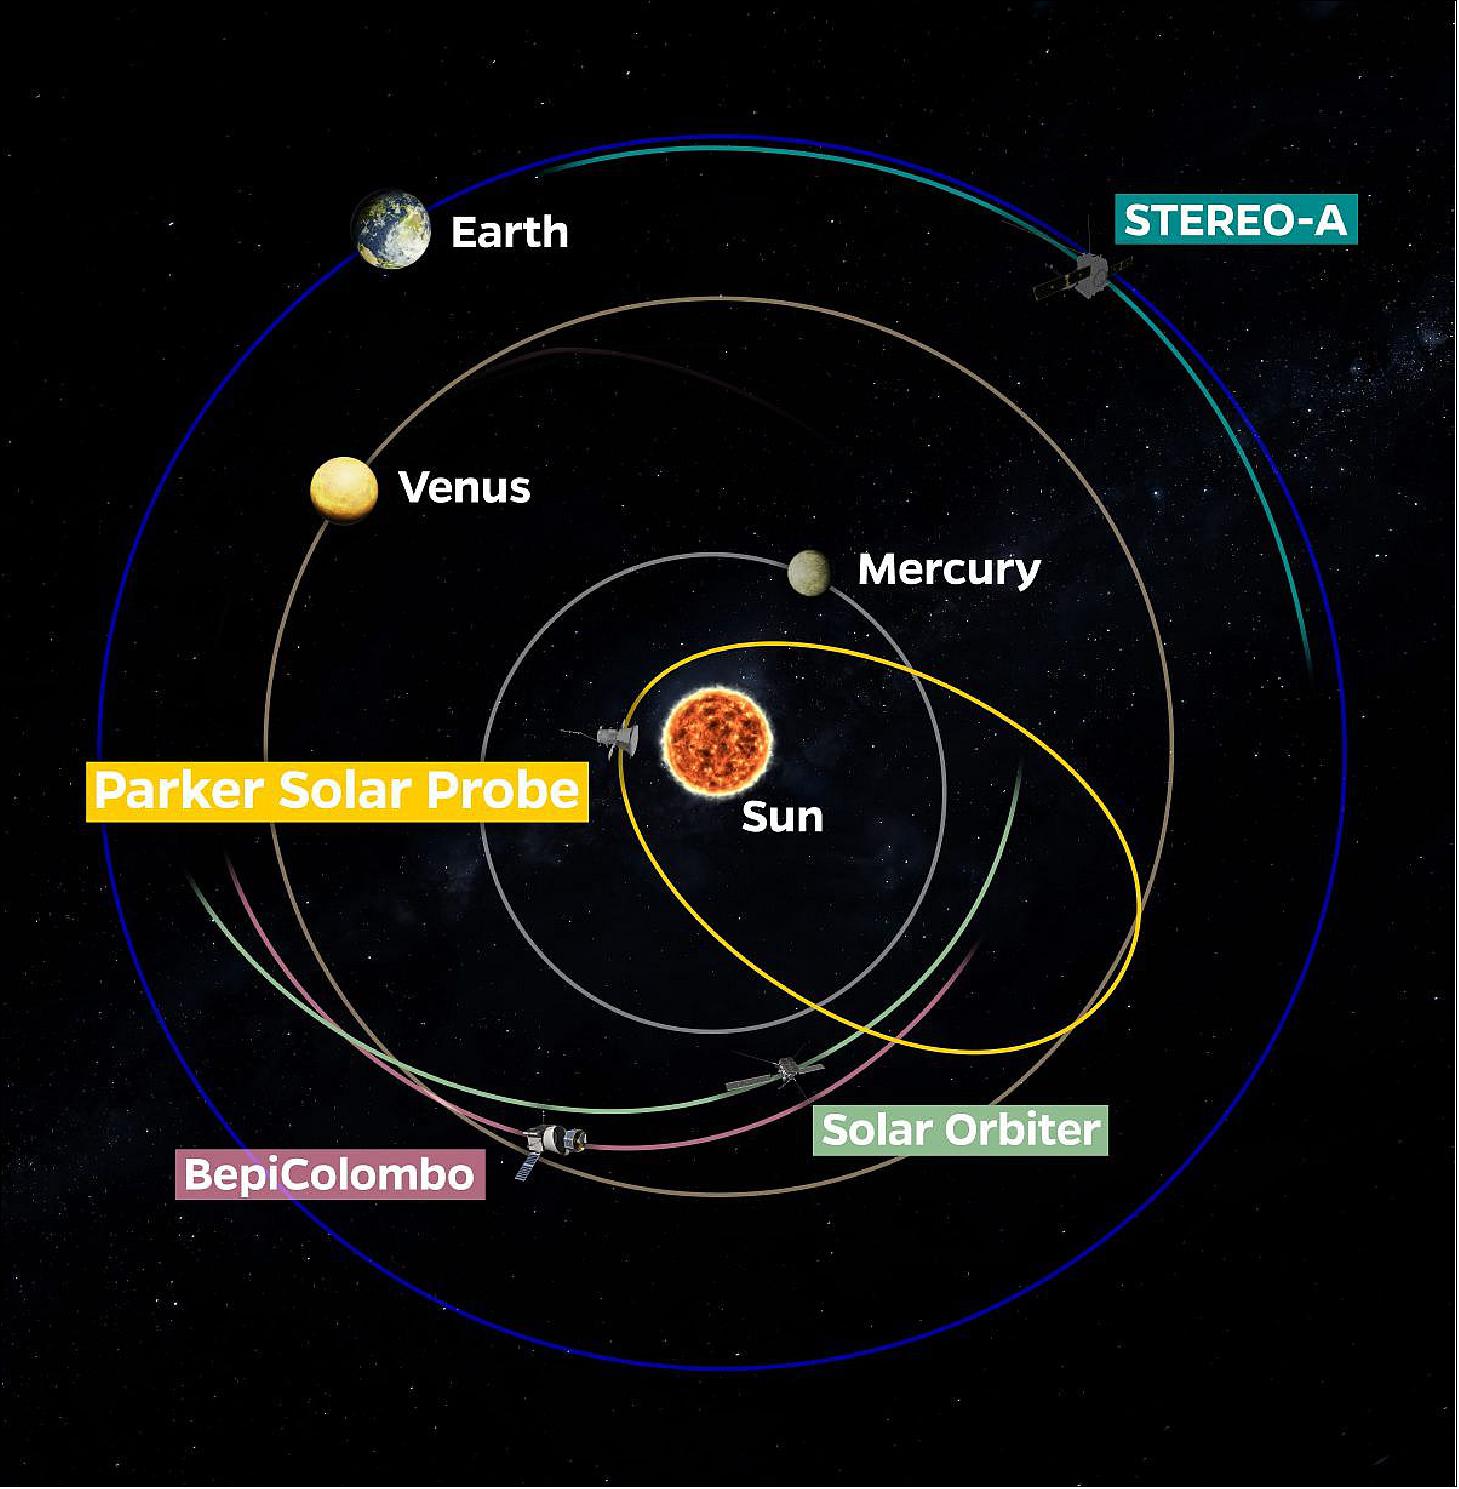 Figure 54: With Parker Solar Probe's latest closest approach to the Sun in direct view of Earth, some 40 observatories around the globe and several spacecraft, including STEREO, BepiColombo, and Solar Orbiter, made simultaneous observations of activity stretching from the Sun to Earth. Distances and planet and spacecraft locations are not to scale (image credit: NASA/Johns Hopkins APL/Nate Rudolph)